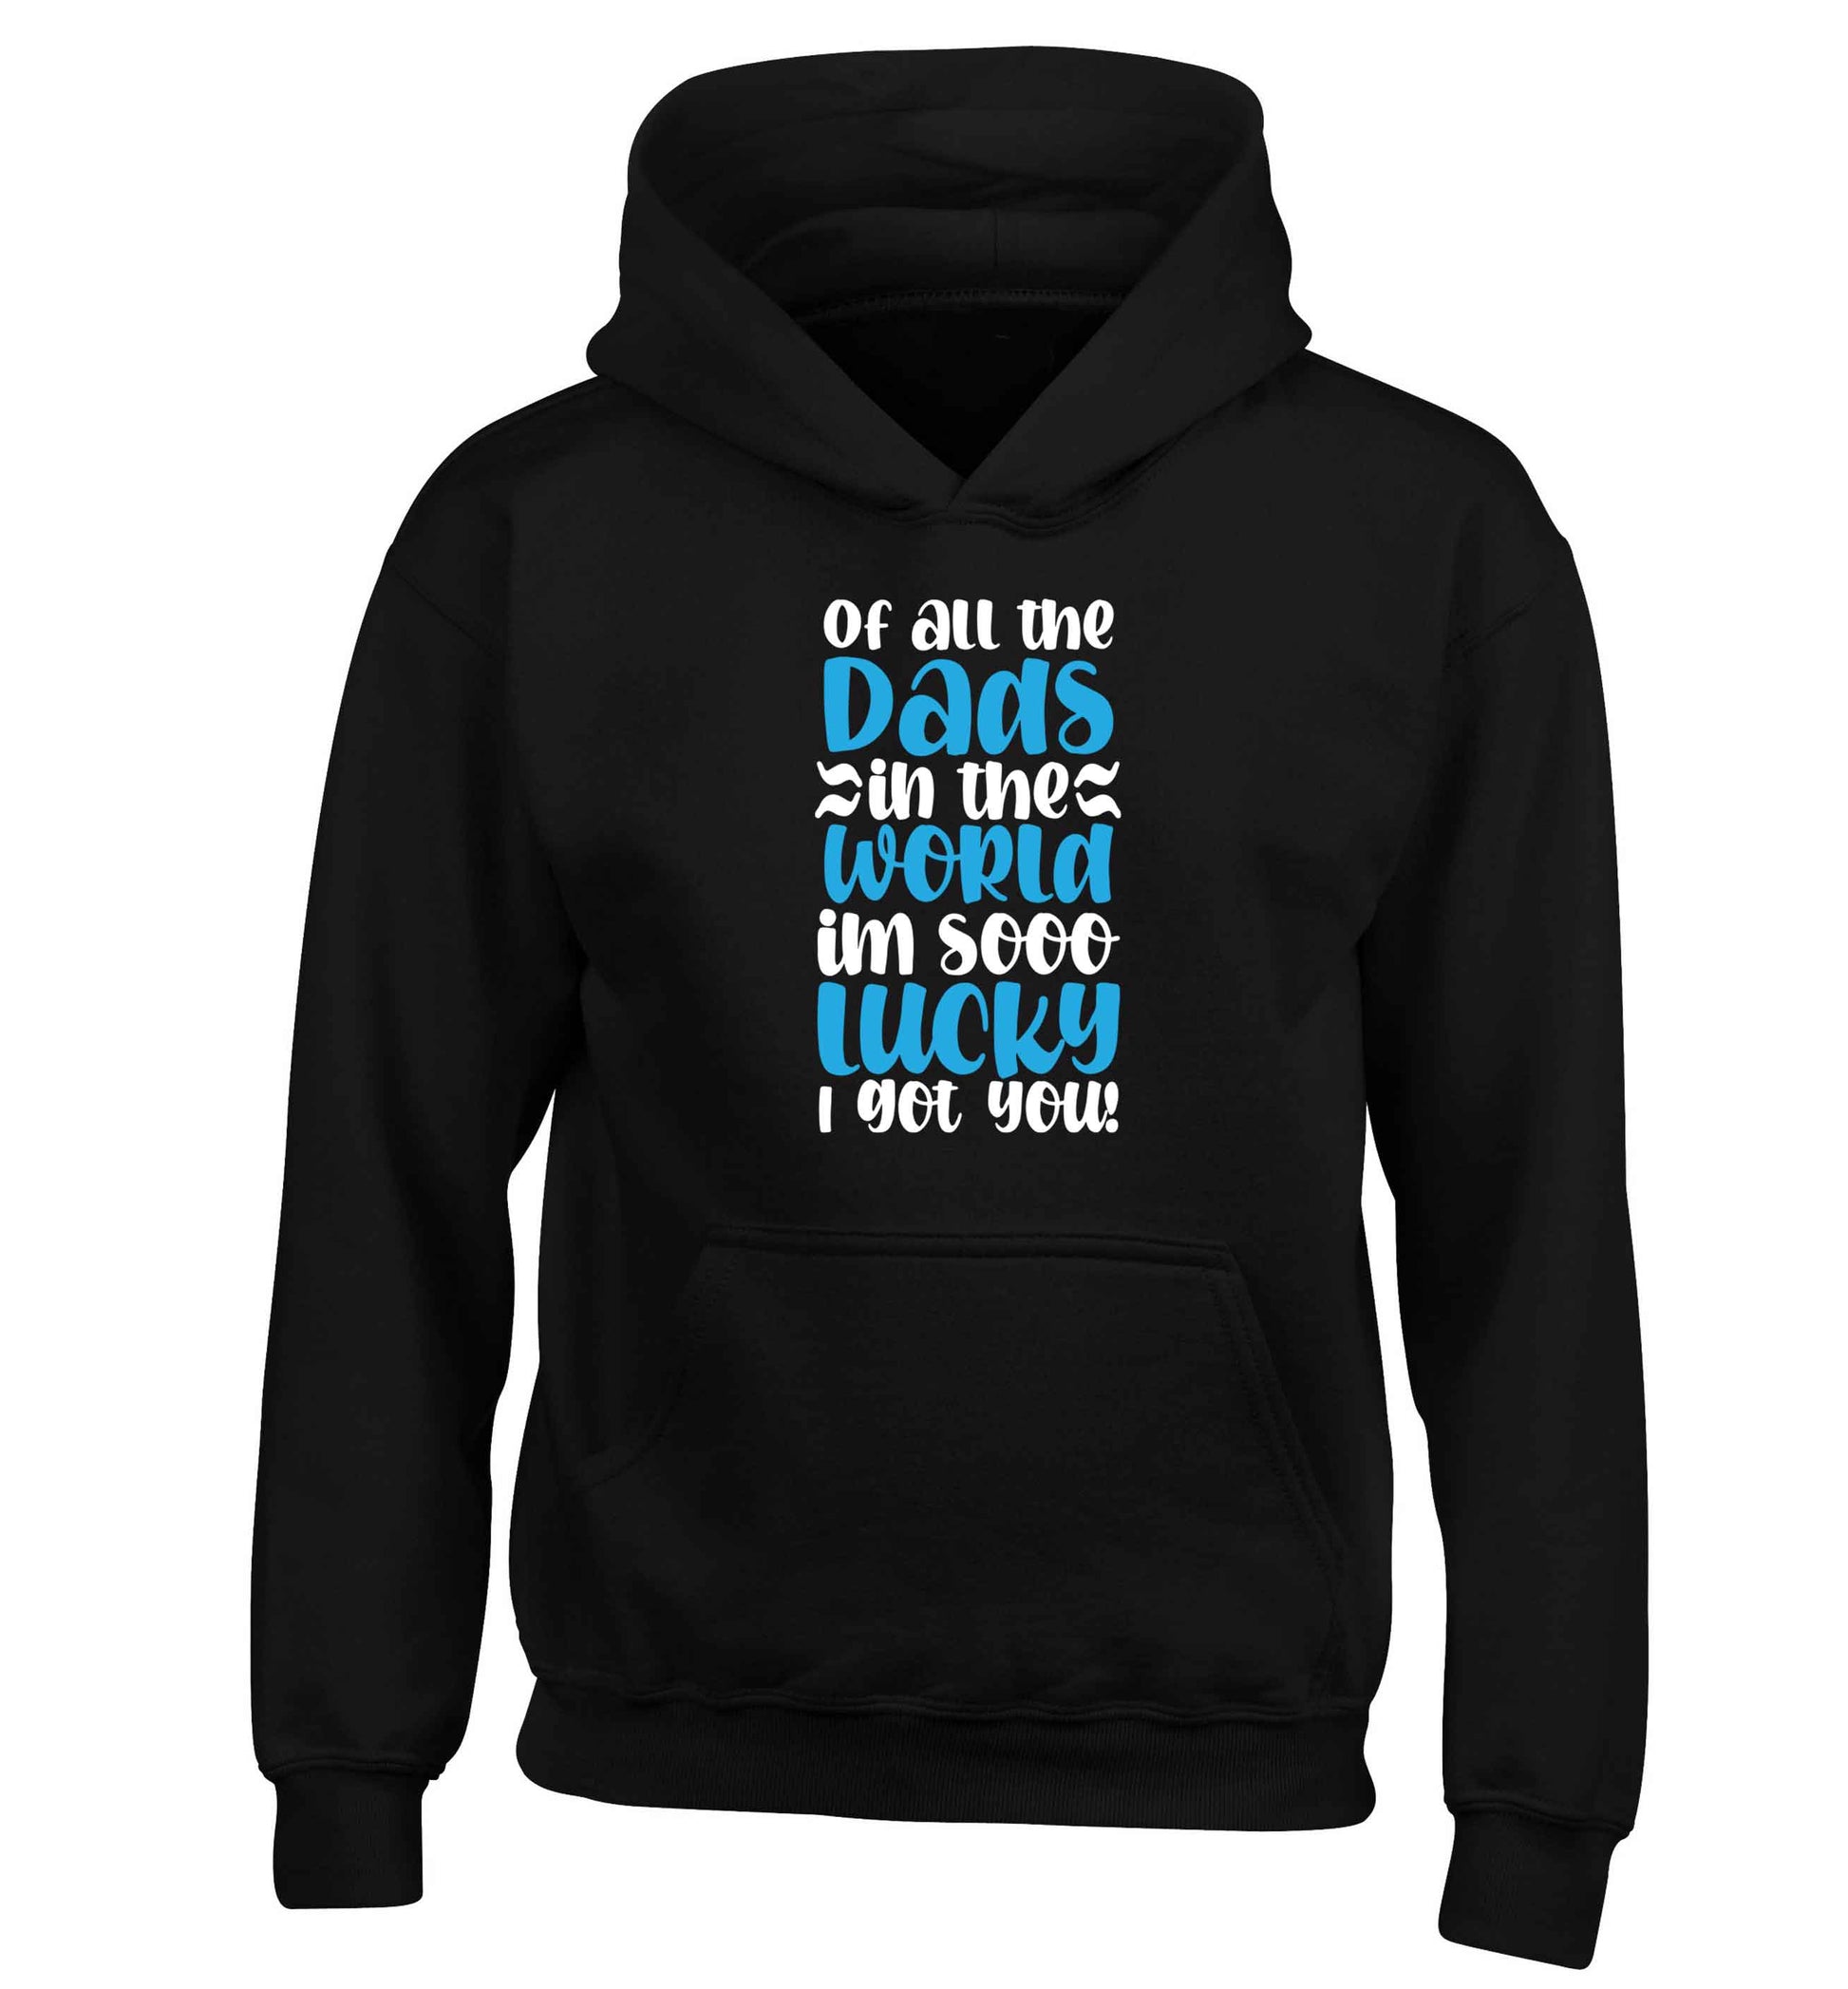 I'm as lucky as can be the worlds greatest dad belongs to me! children's black hoodie 12-13 Years